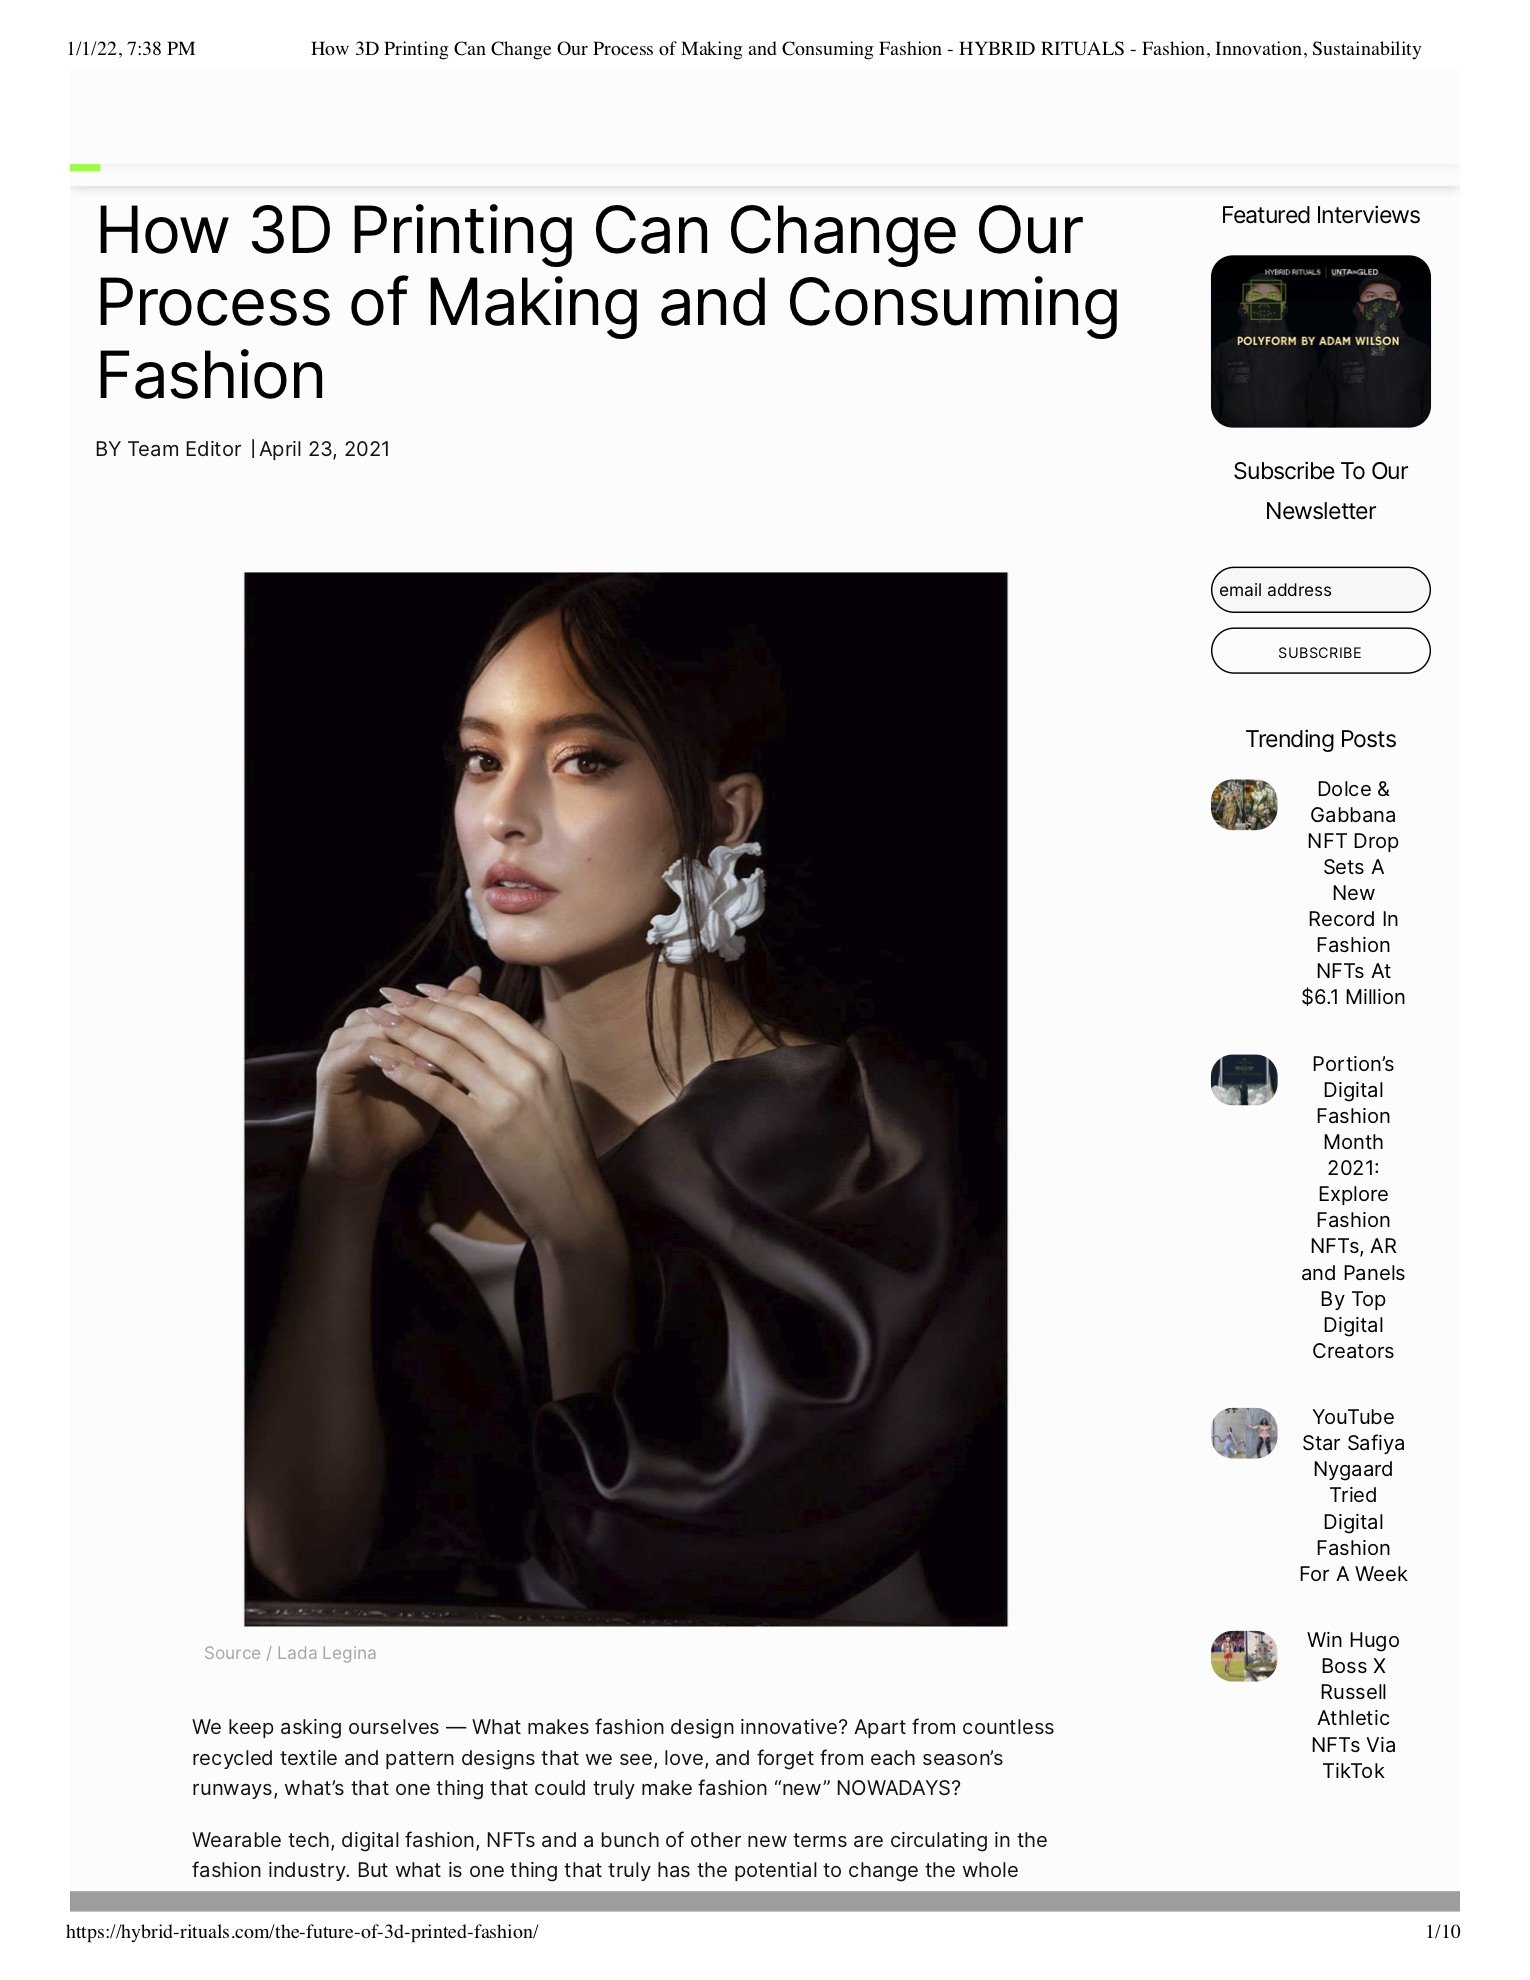 How 3D Printing Can Change Our Process ... - Fashion, Innovation, Sustainability.jpg